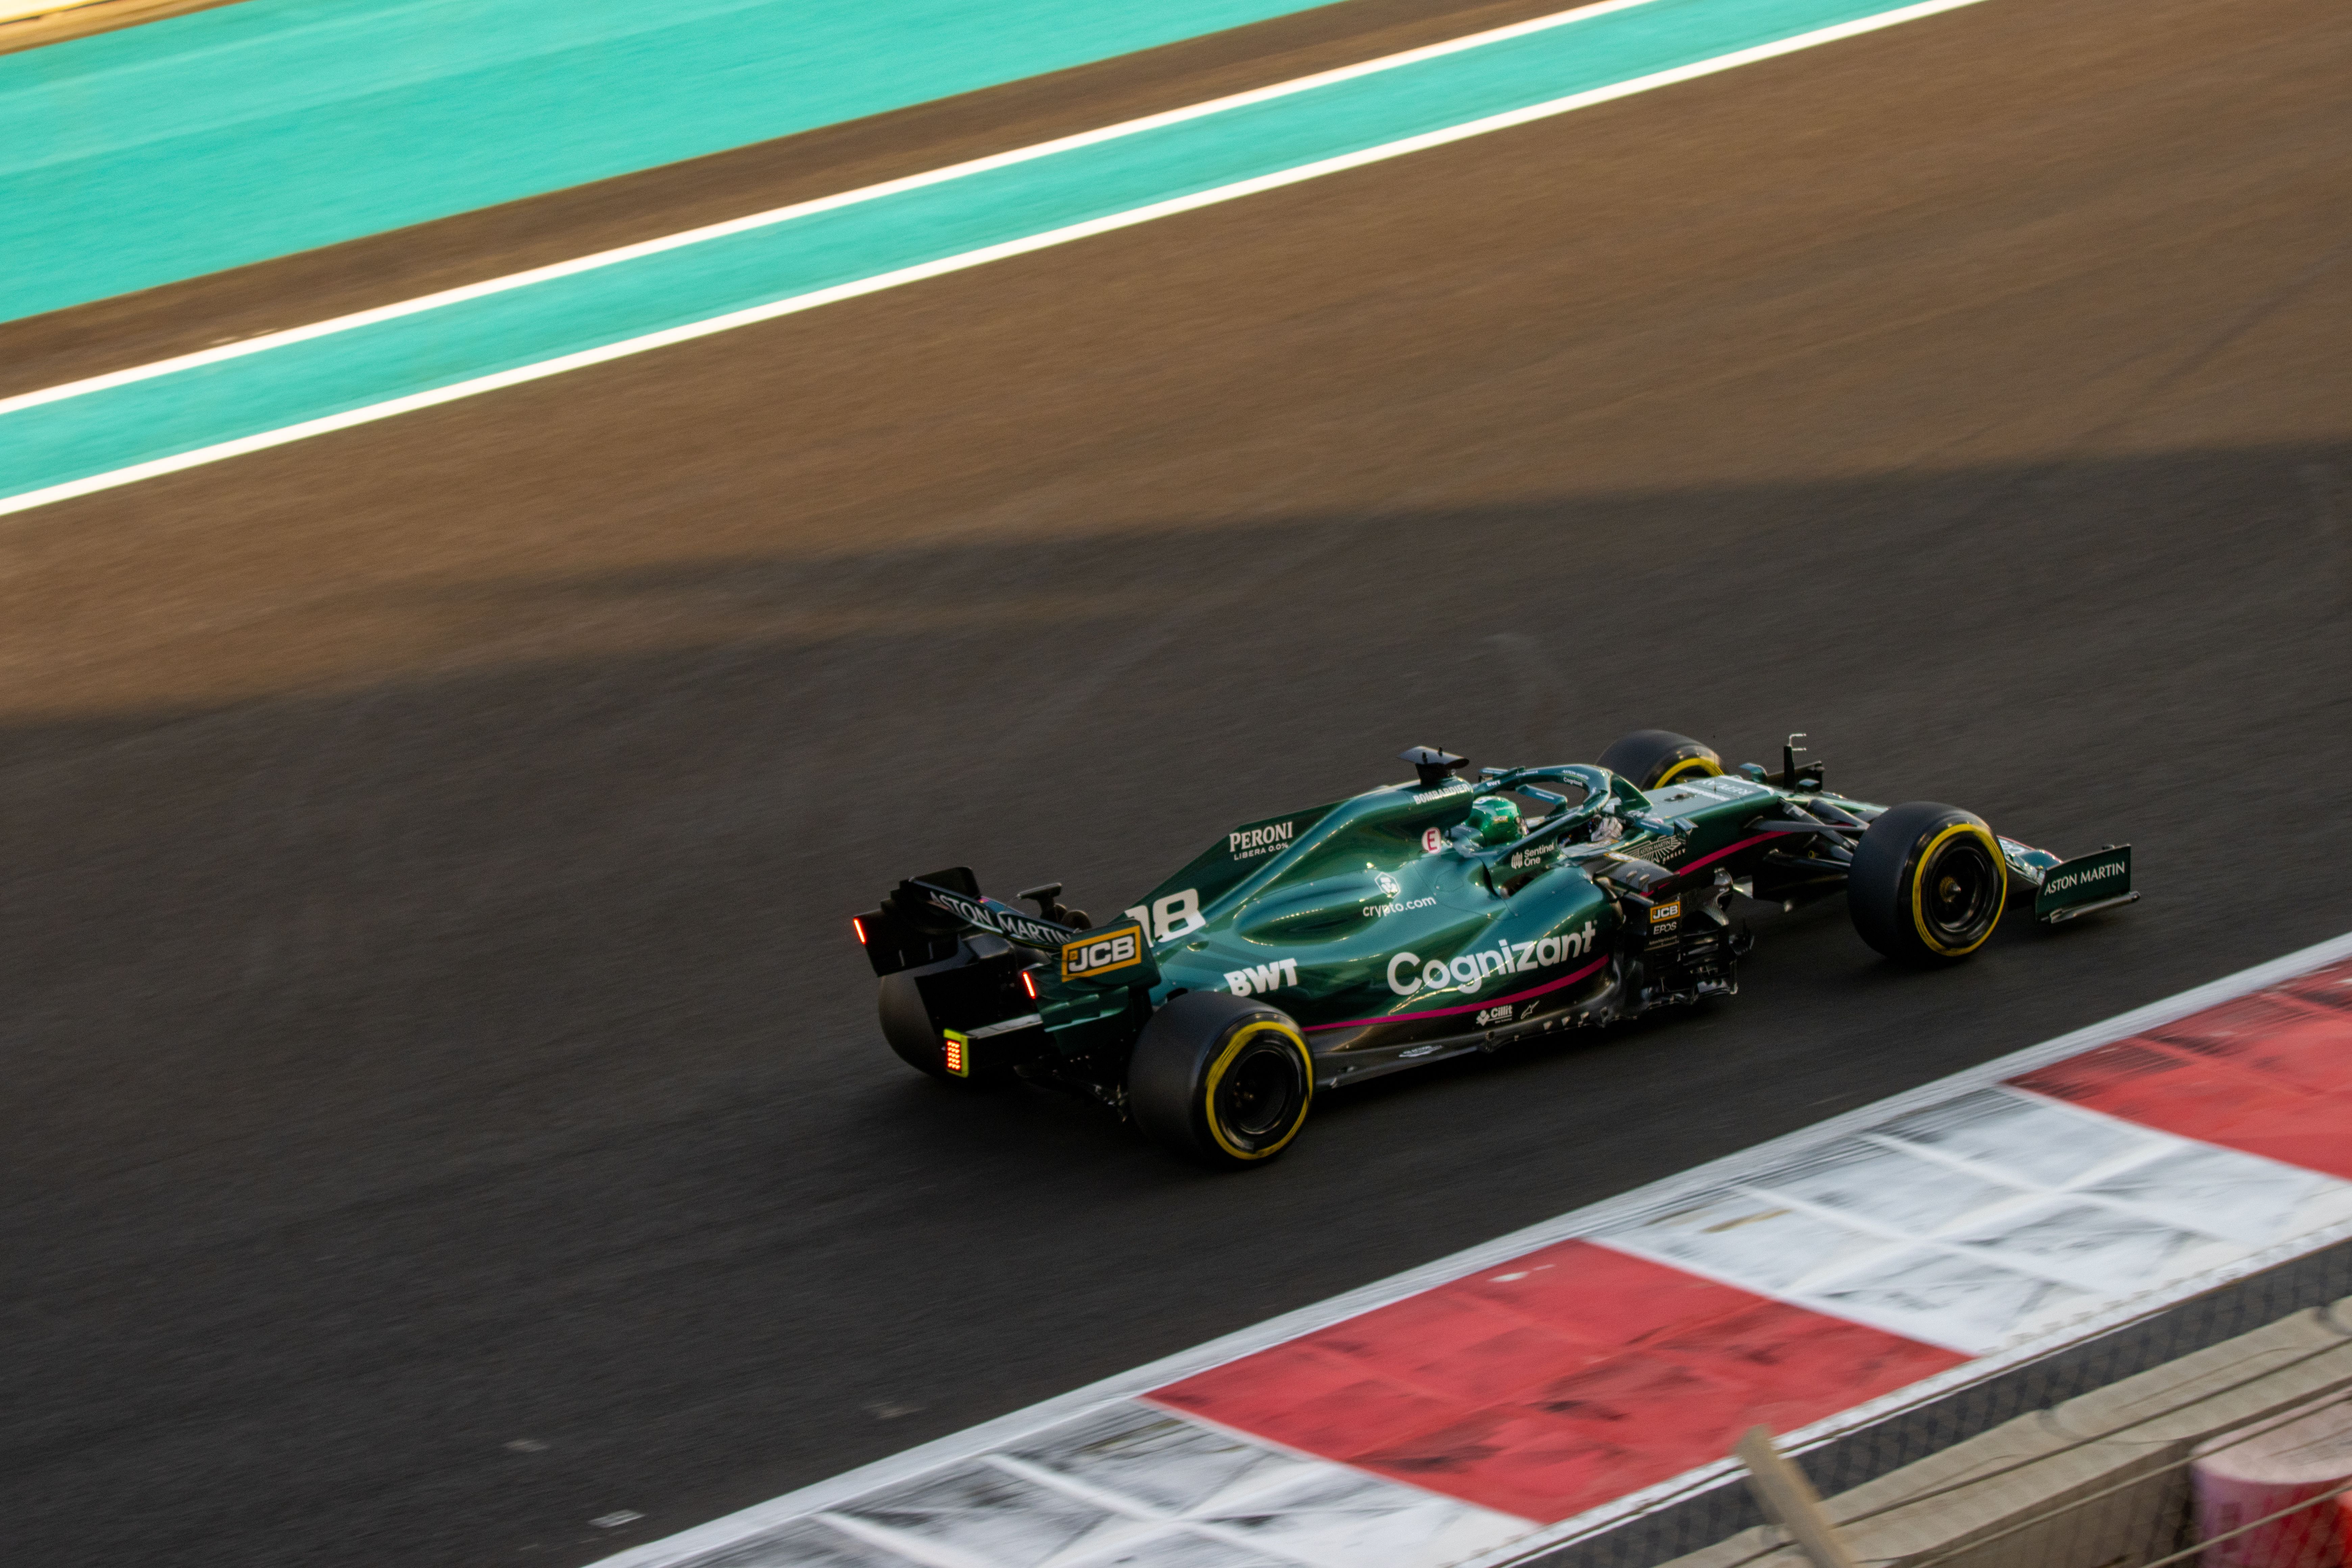 Aston Martin F1 driver Lance Stroll drives past the camera at the 2021 Abu Dhabi Grand Prix. The car is a greenish grey with the number 18 on the side.